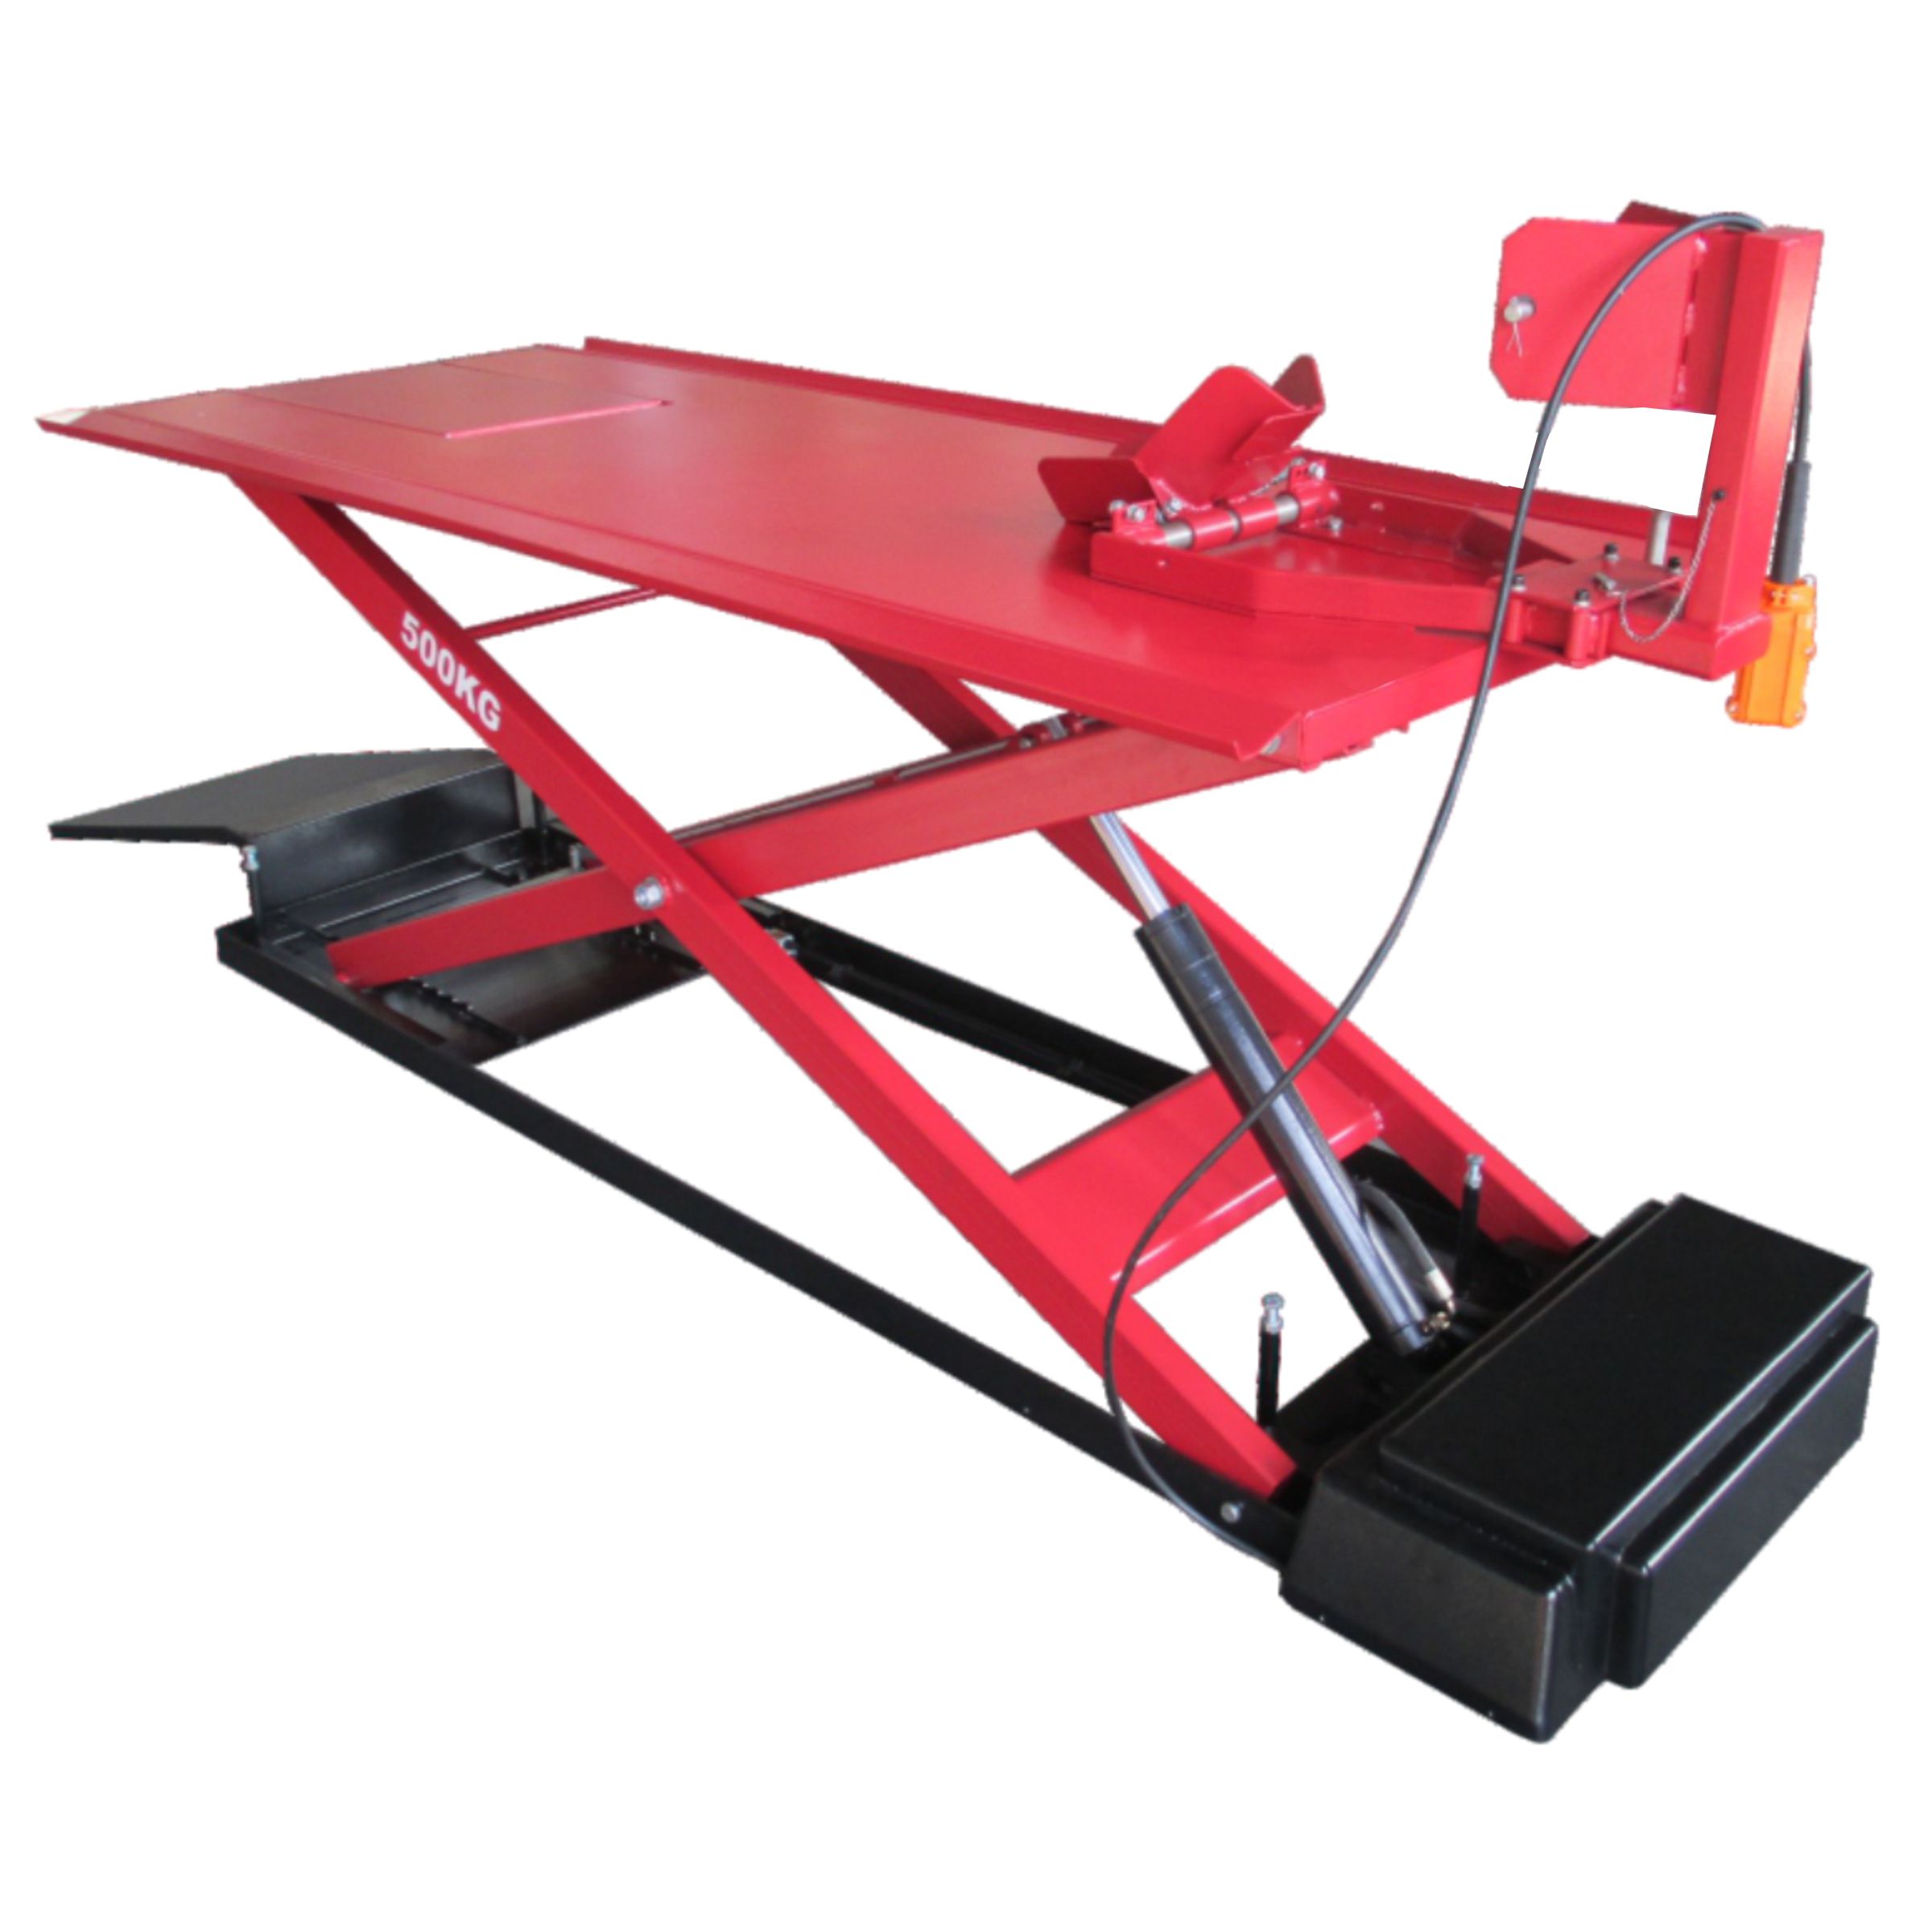 U-M03 Electrical Motorcycle Lift Table